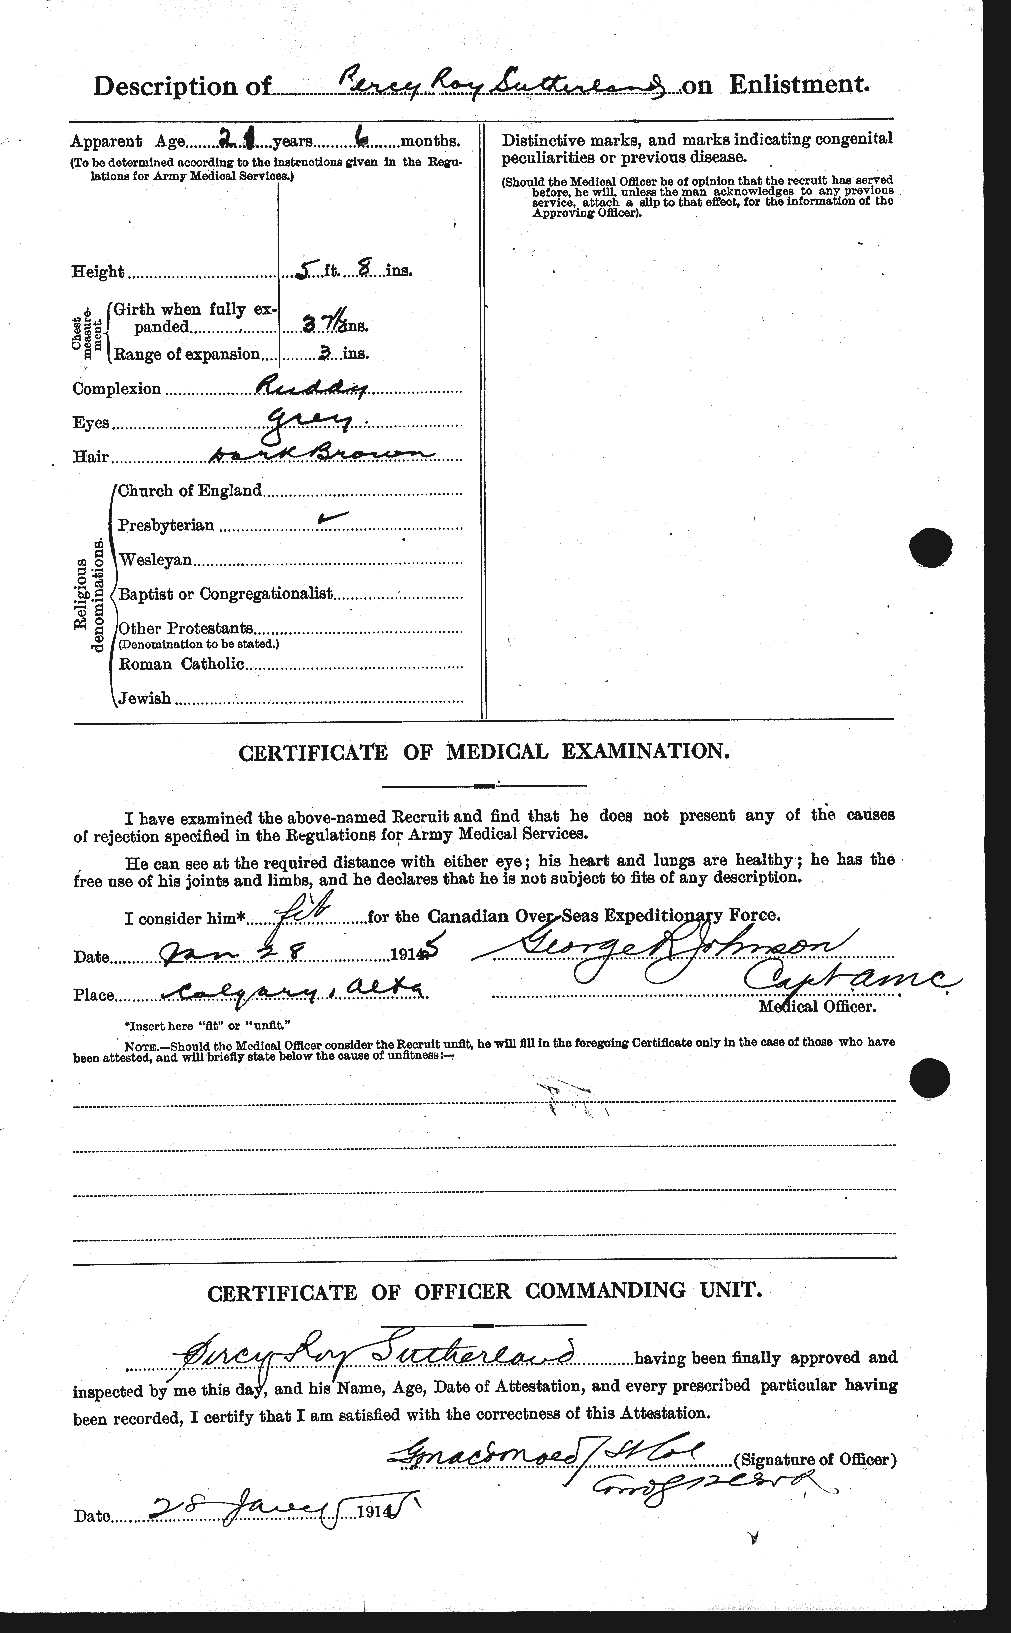 Personnel Records of the First World War - CEF 126822b